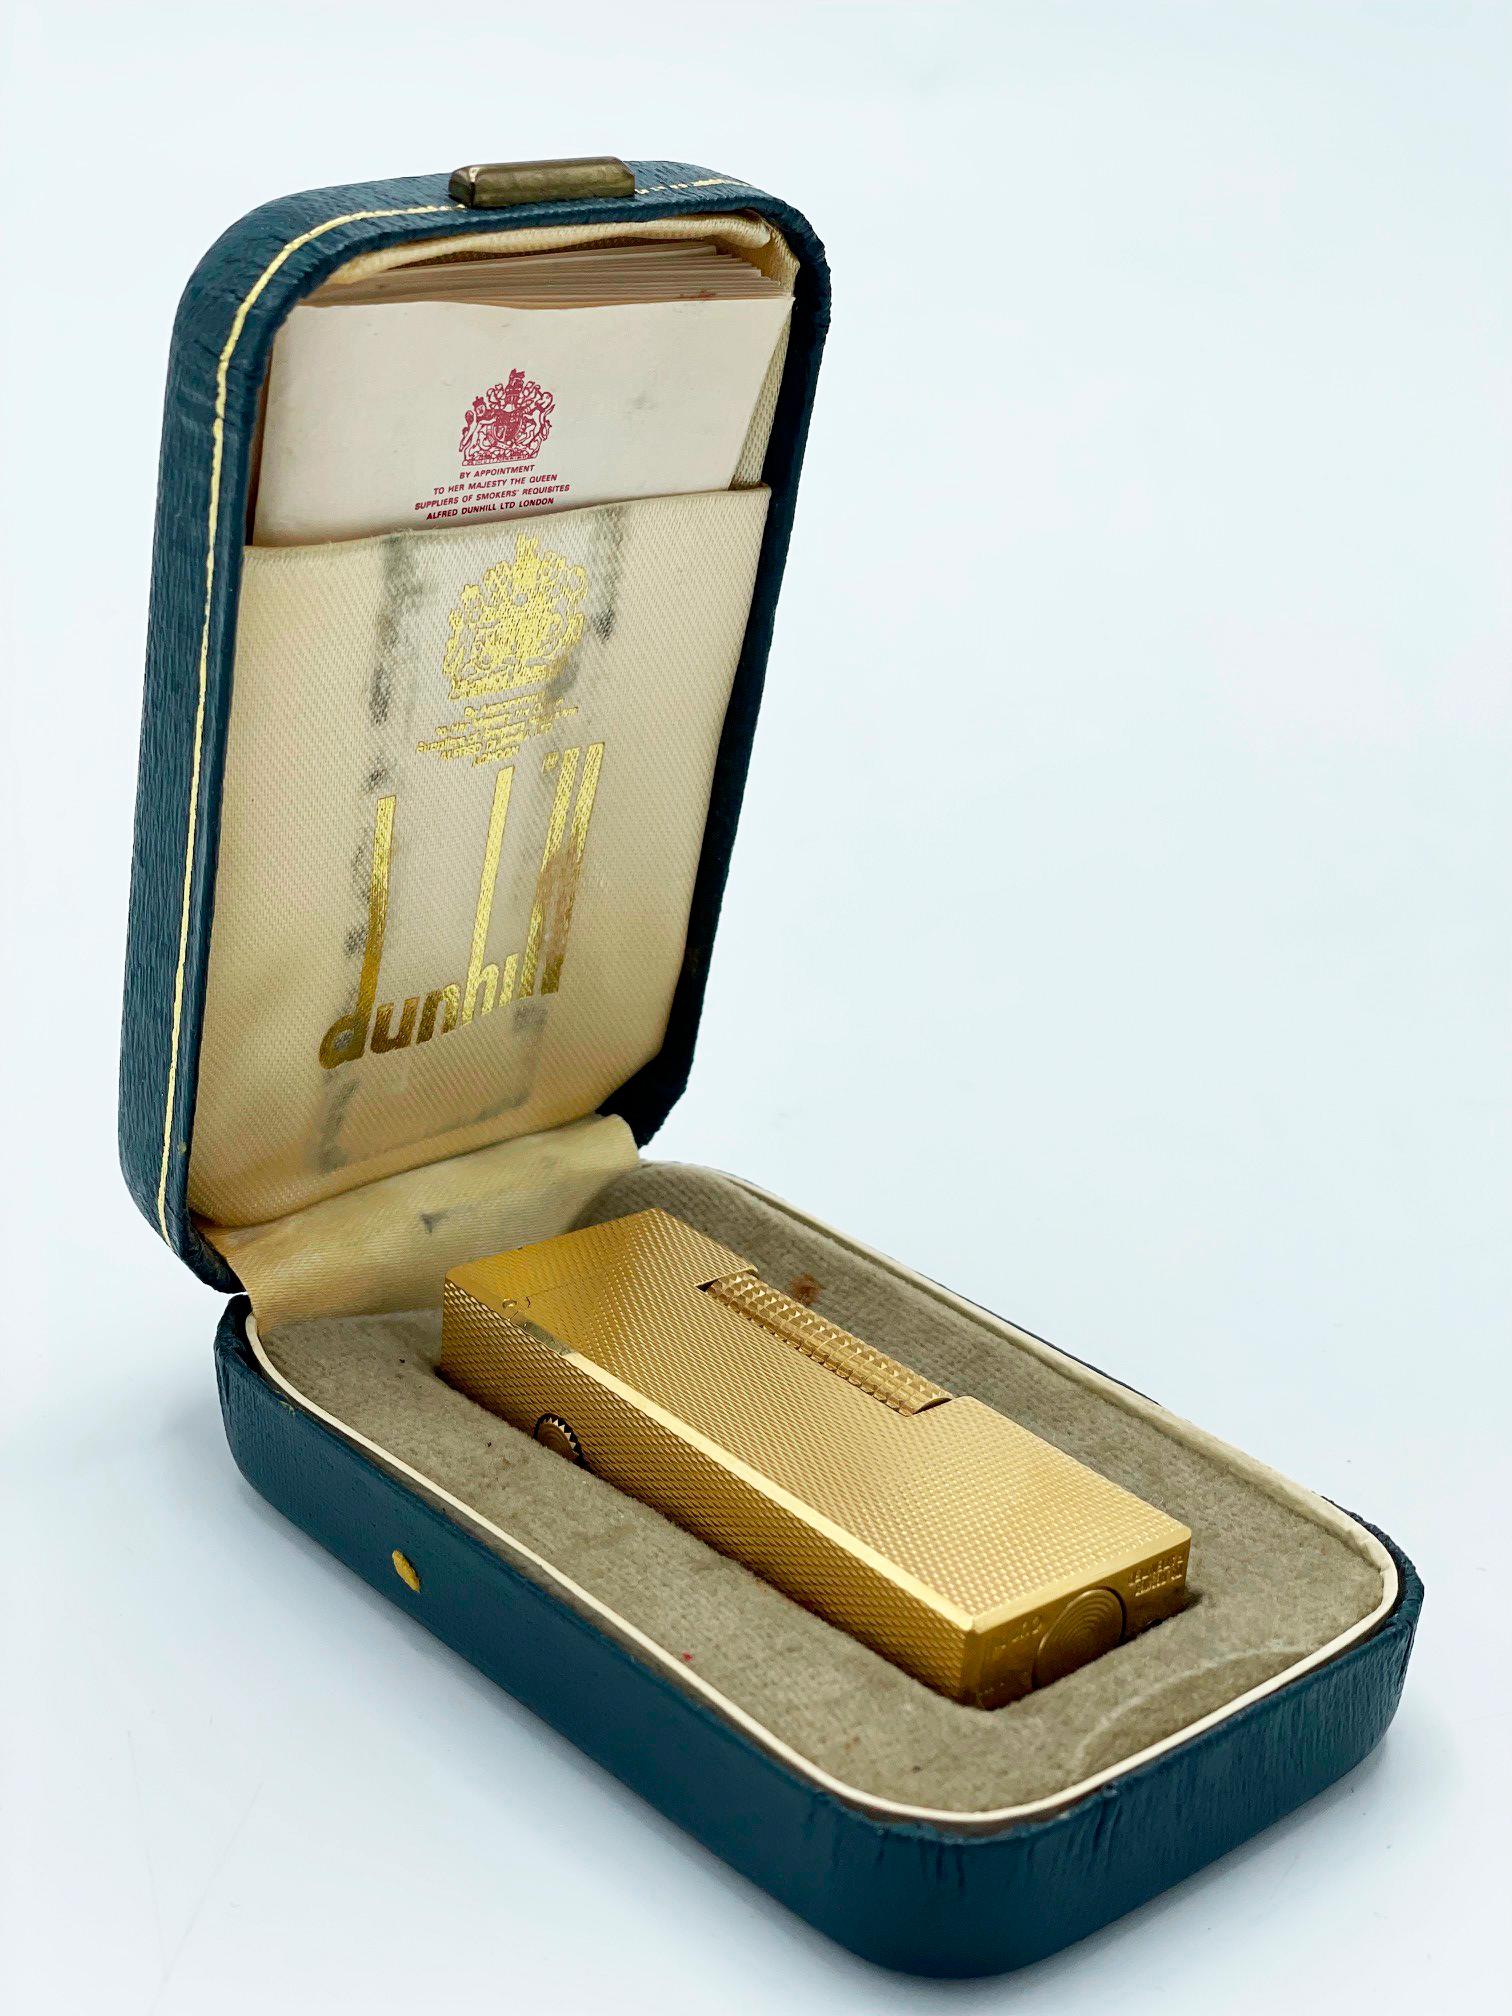 Iconic and beautifully engineered piece rare condition, James Bond lighter of choice.
In mint condition. Works perfectly.
Original box which is in mint condition, as good as new.
With Original paper certificate in box.
Brand: Dunhill
Model: